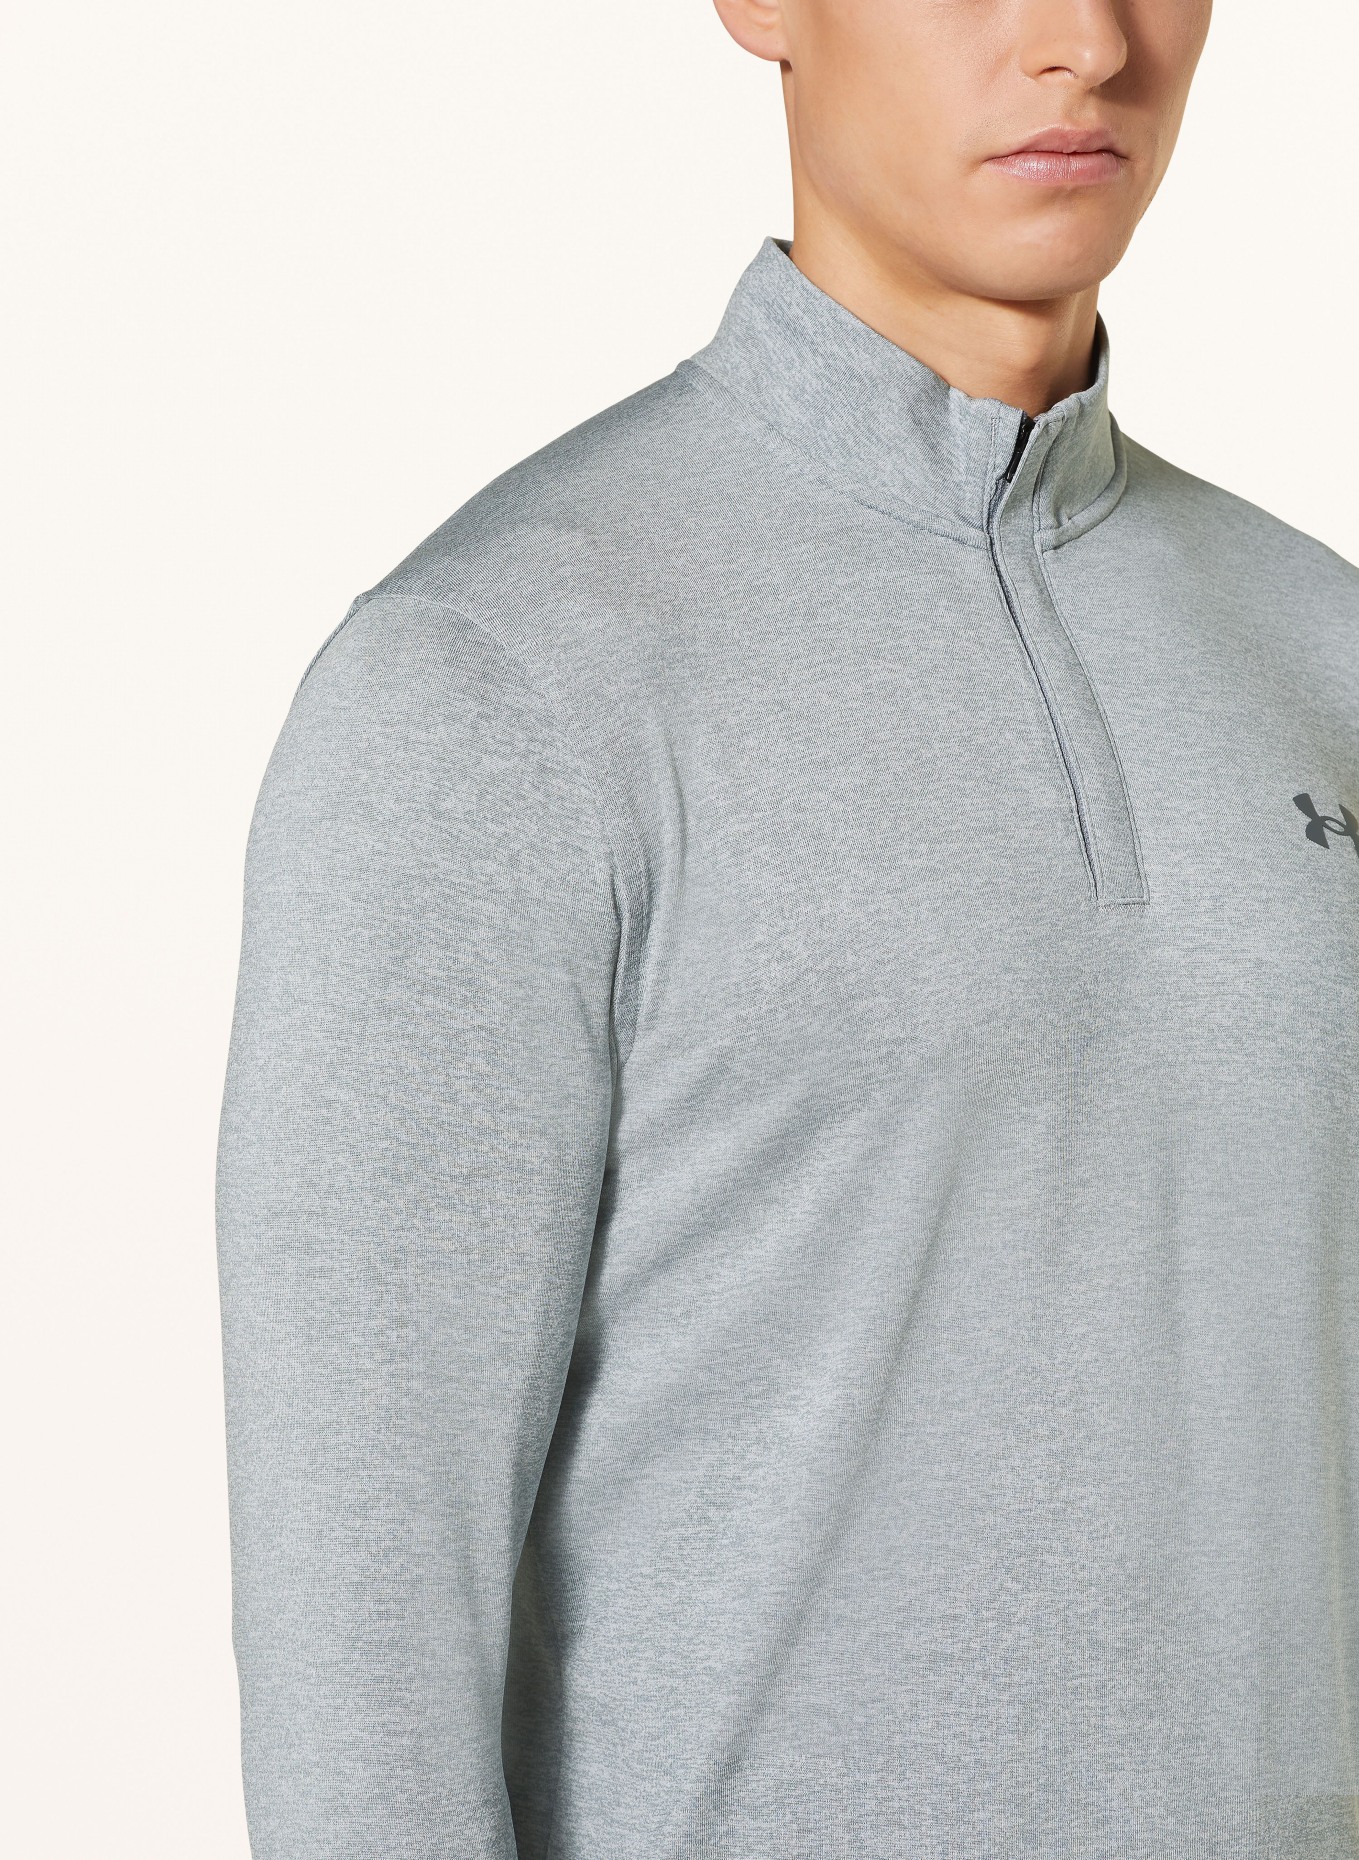 UNDER ARMOUR Long sleeve shirt with UV protection 50+, Color: GRAY (Image 4)